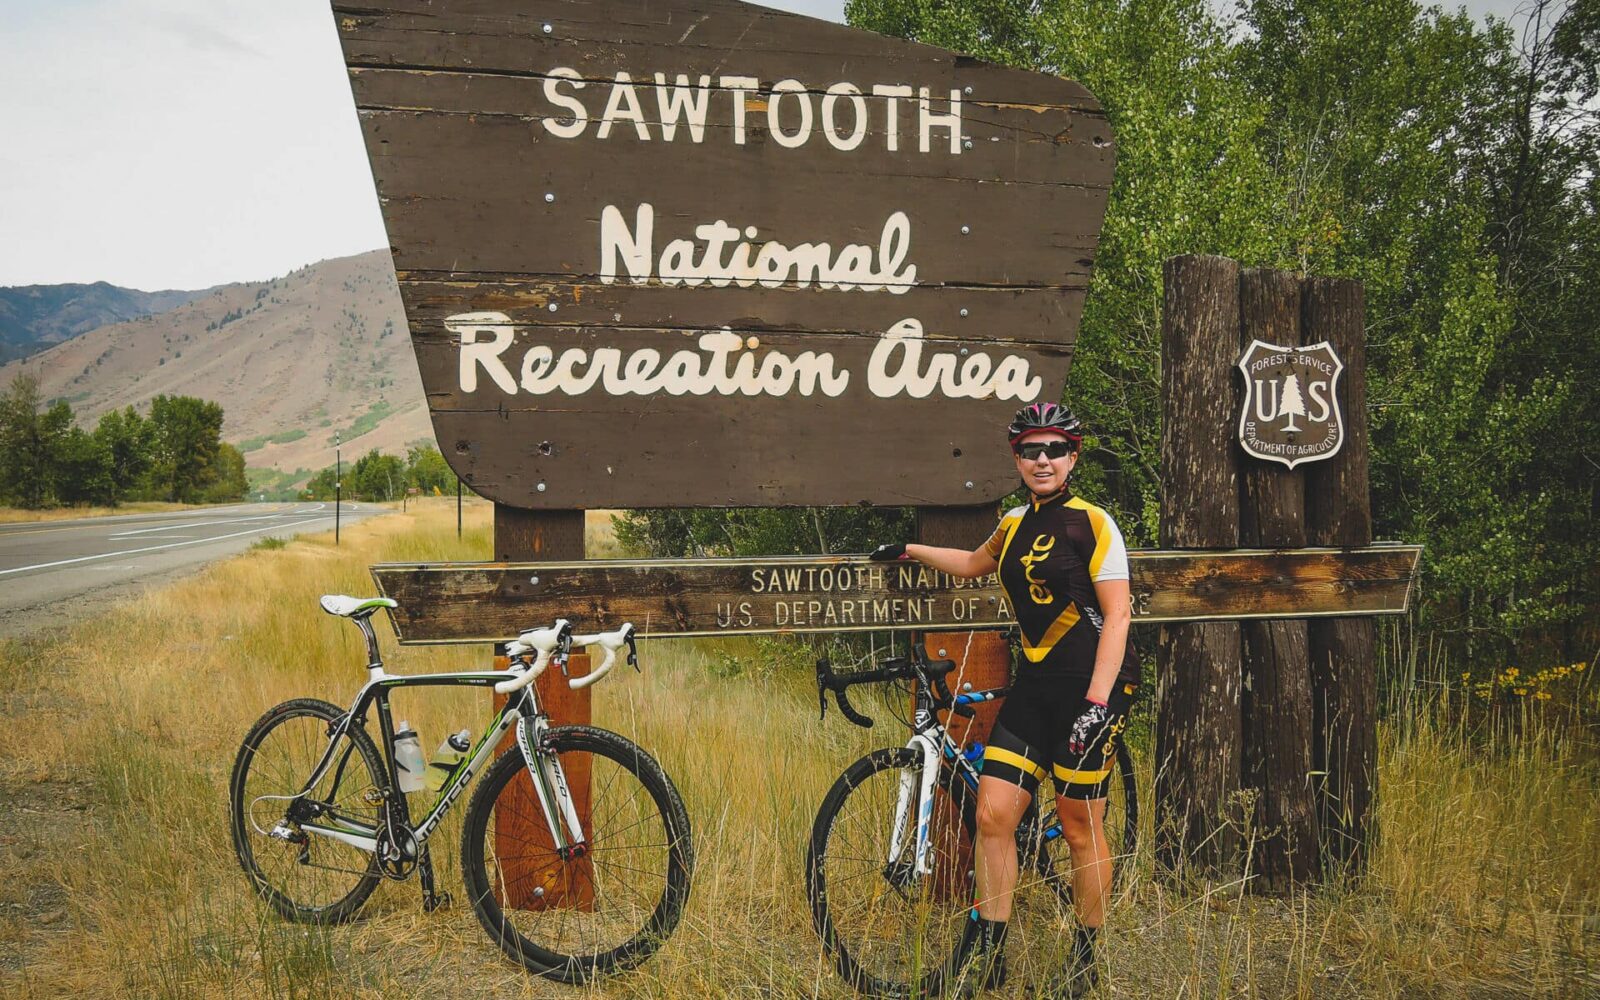 Cyclists in Sawtooth National Recreation Area, ID